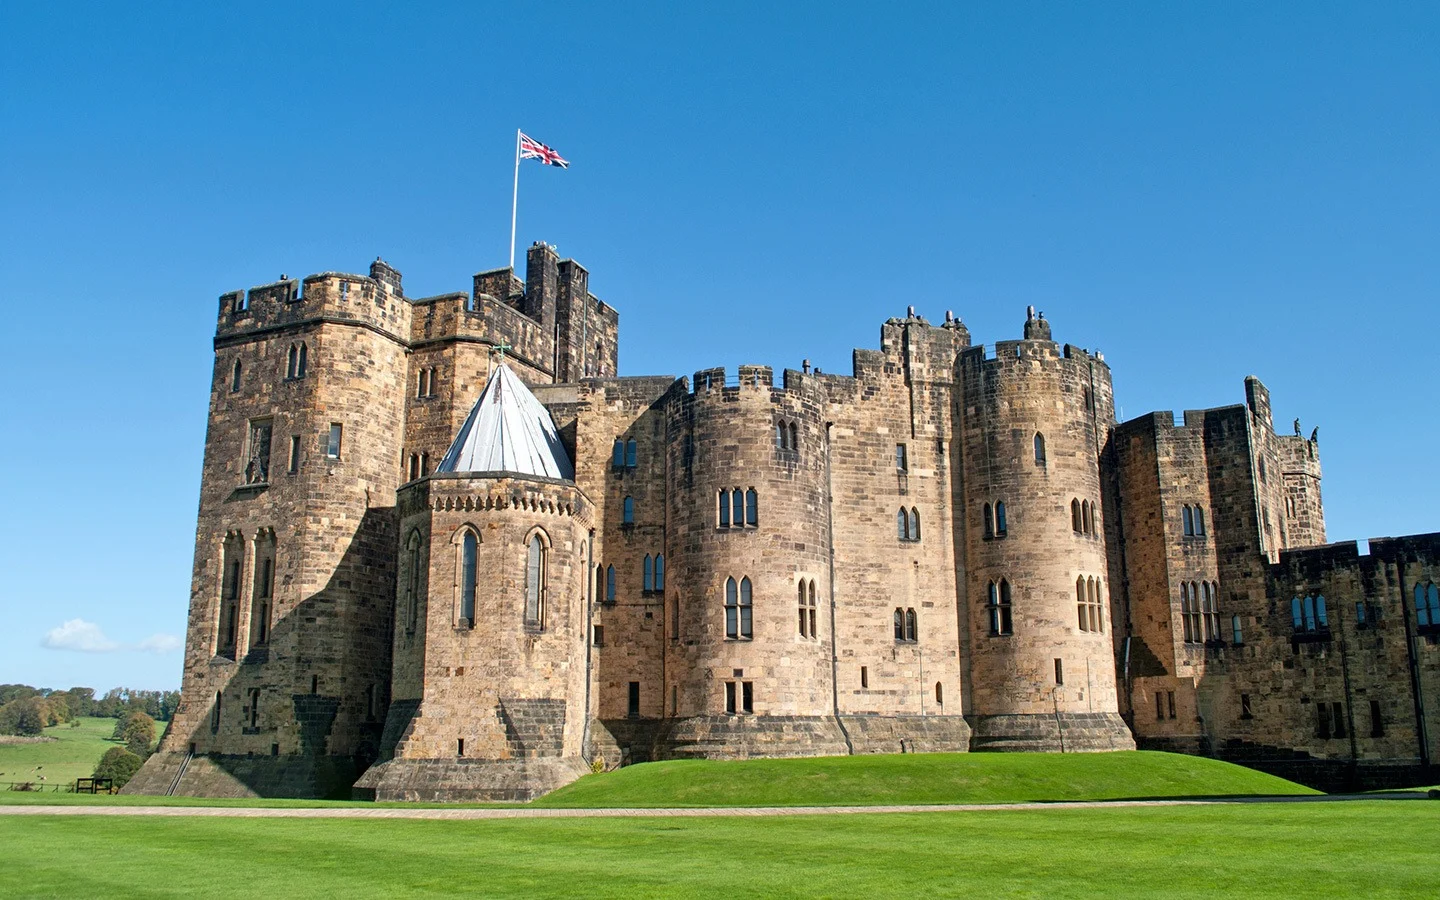 Alnwick Castle in Northumberland, England, a Harry Potter filming location